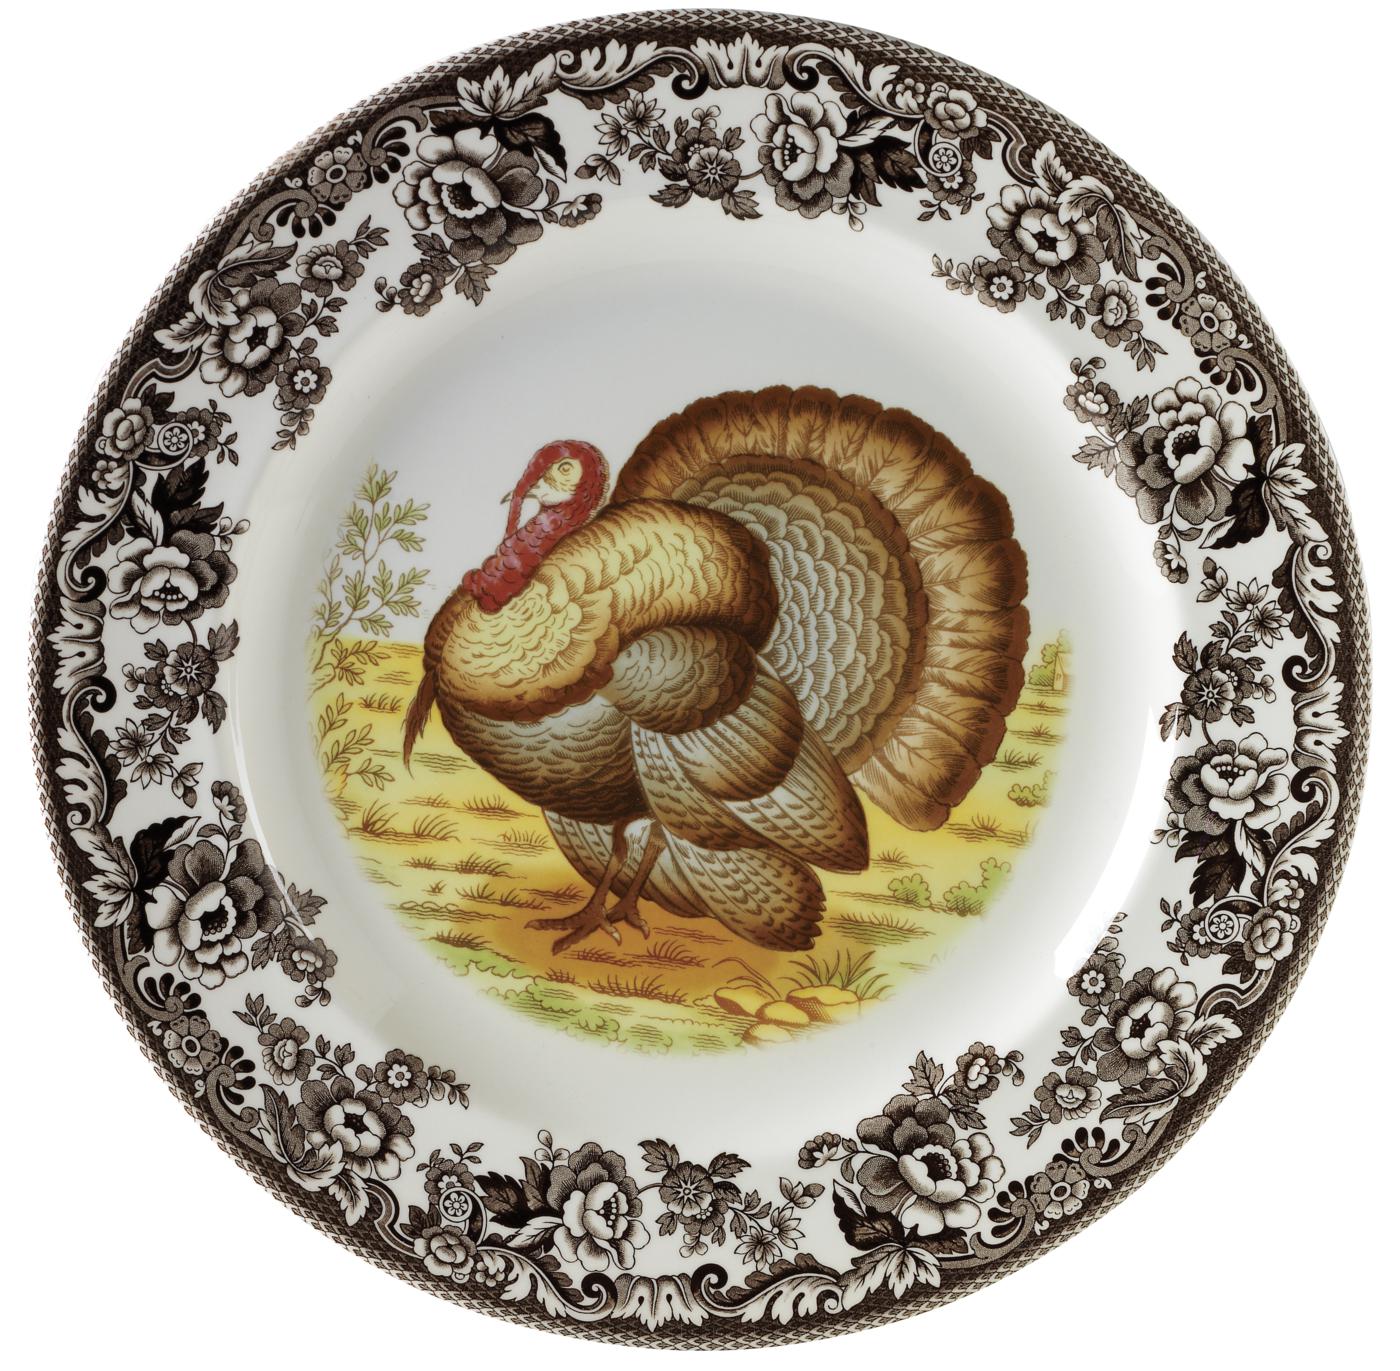 Woodland Turkey Plate A MustHave for Thanksgiving